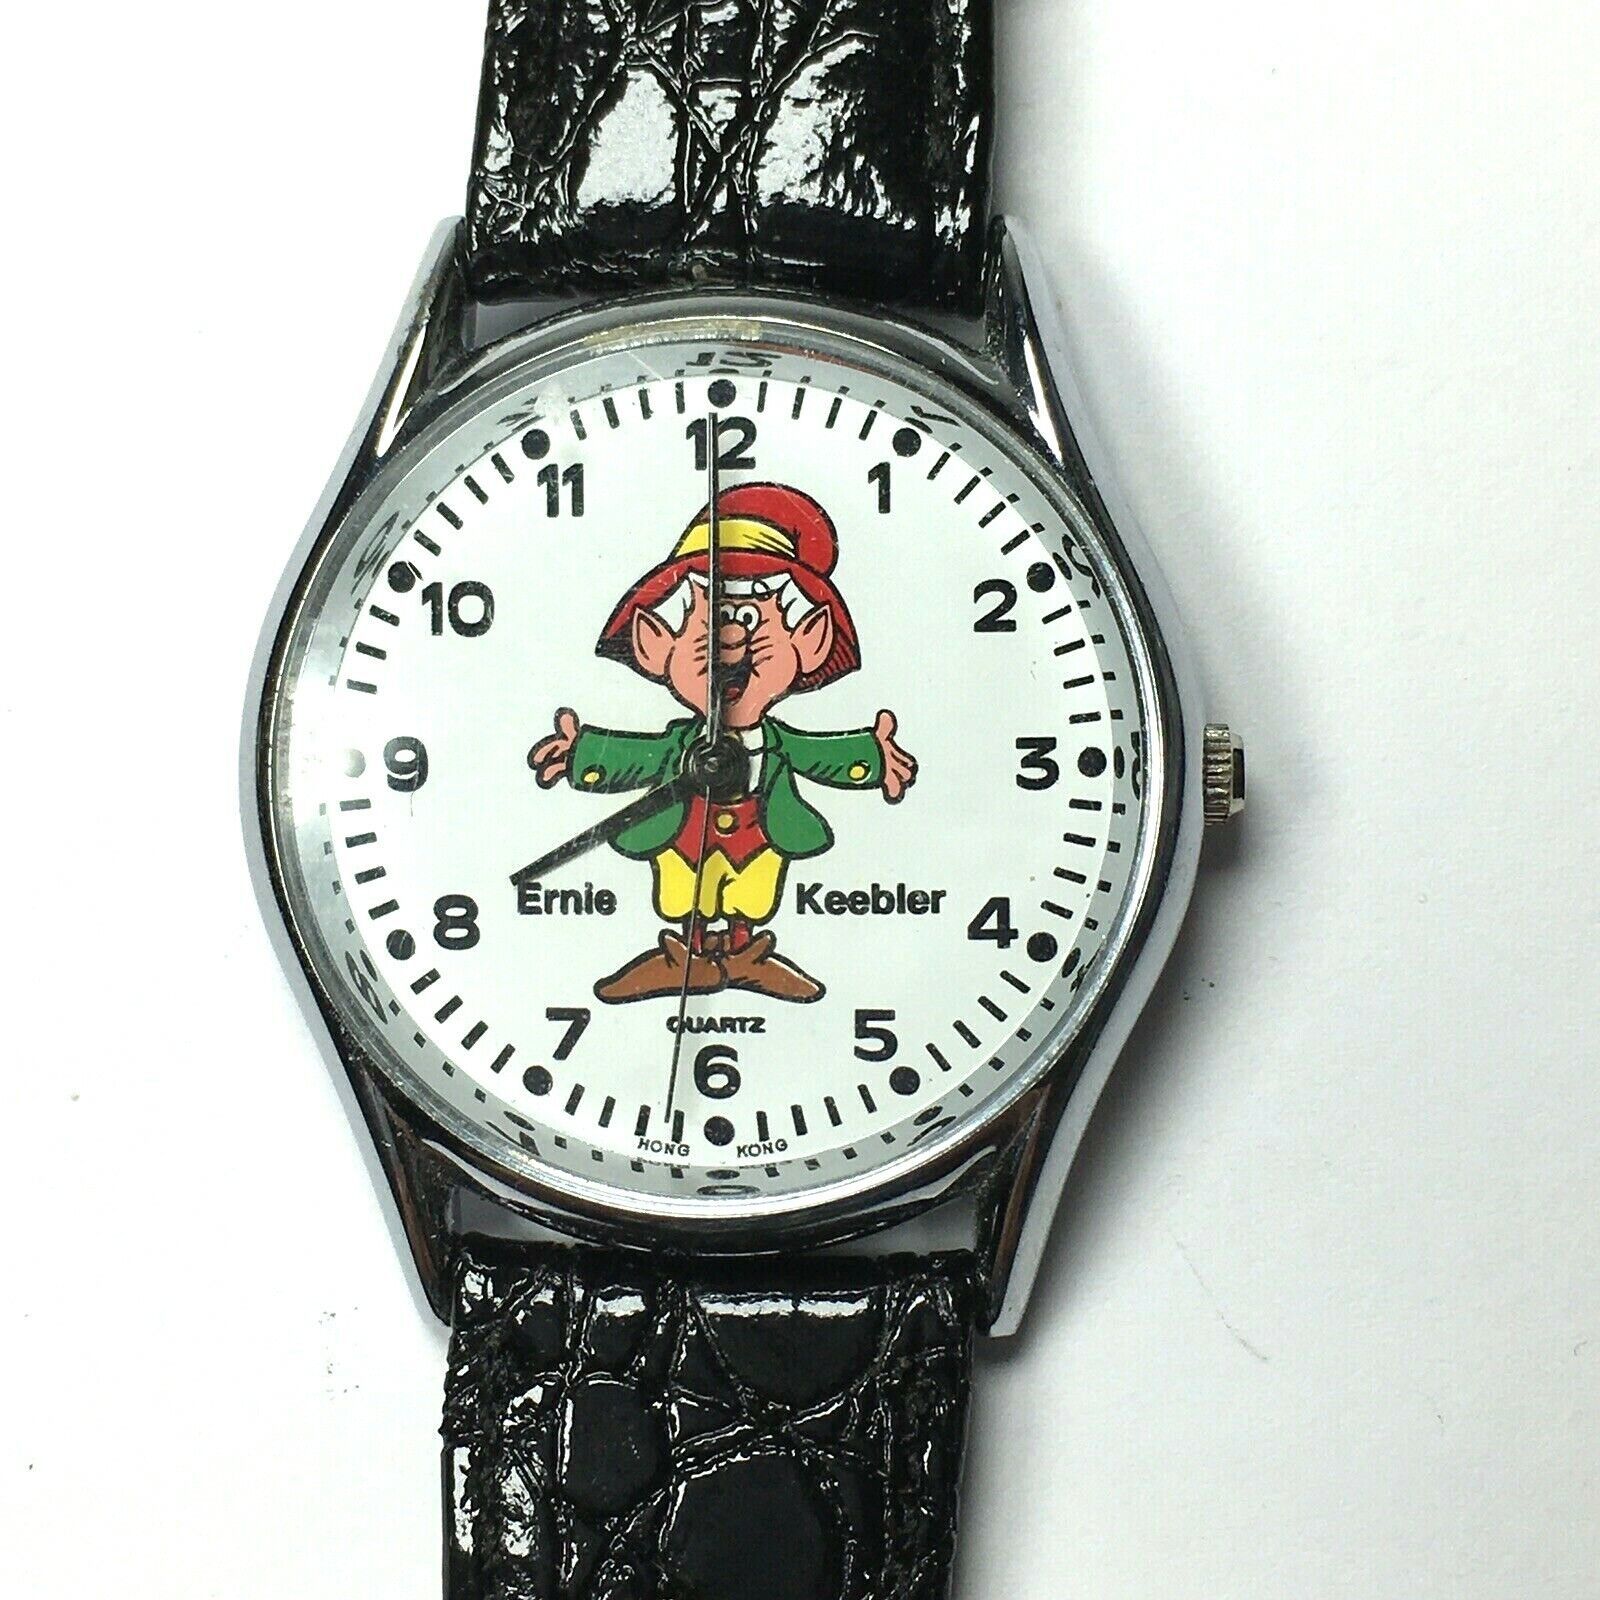 Primary image for Keebler Watch Ernie The Elf LeJour - Needs Battery